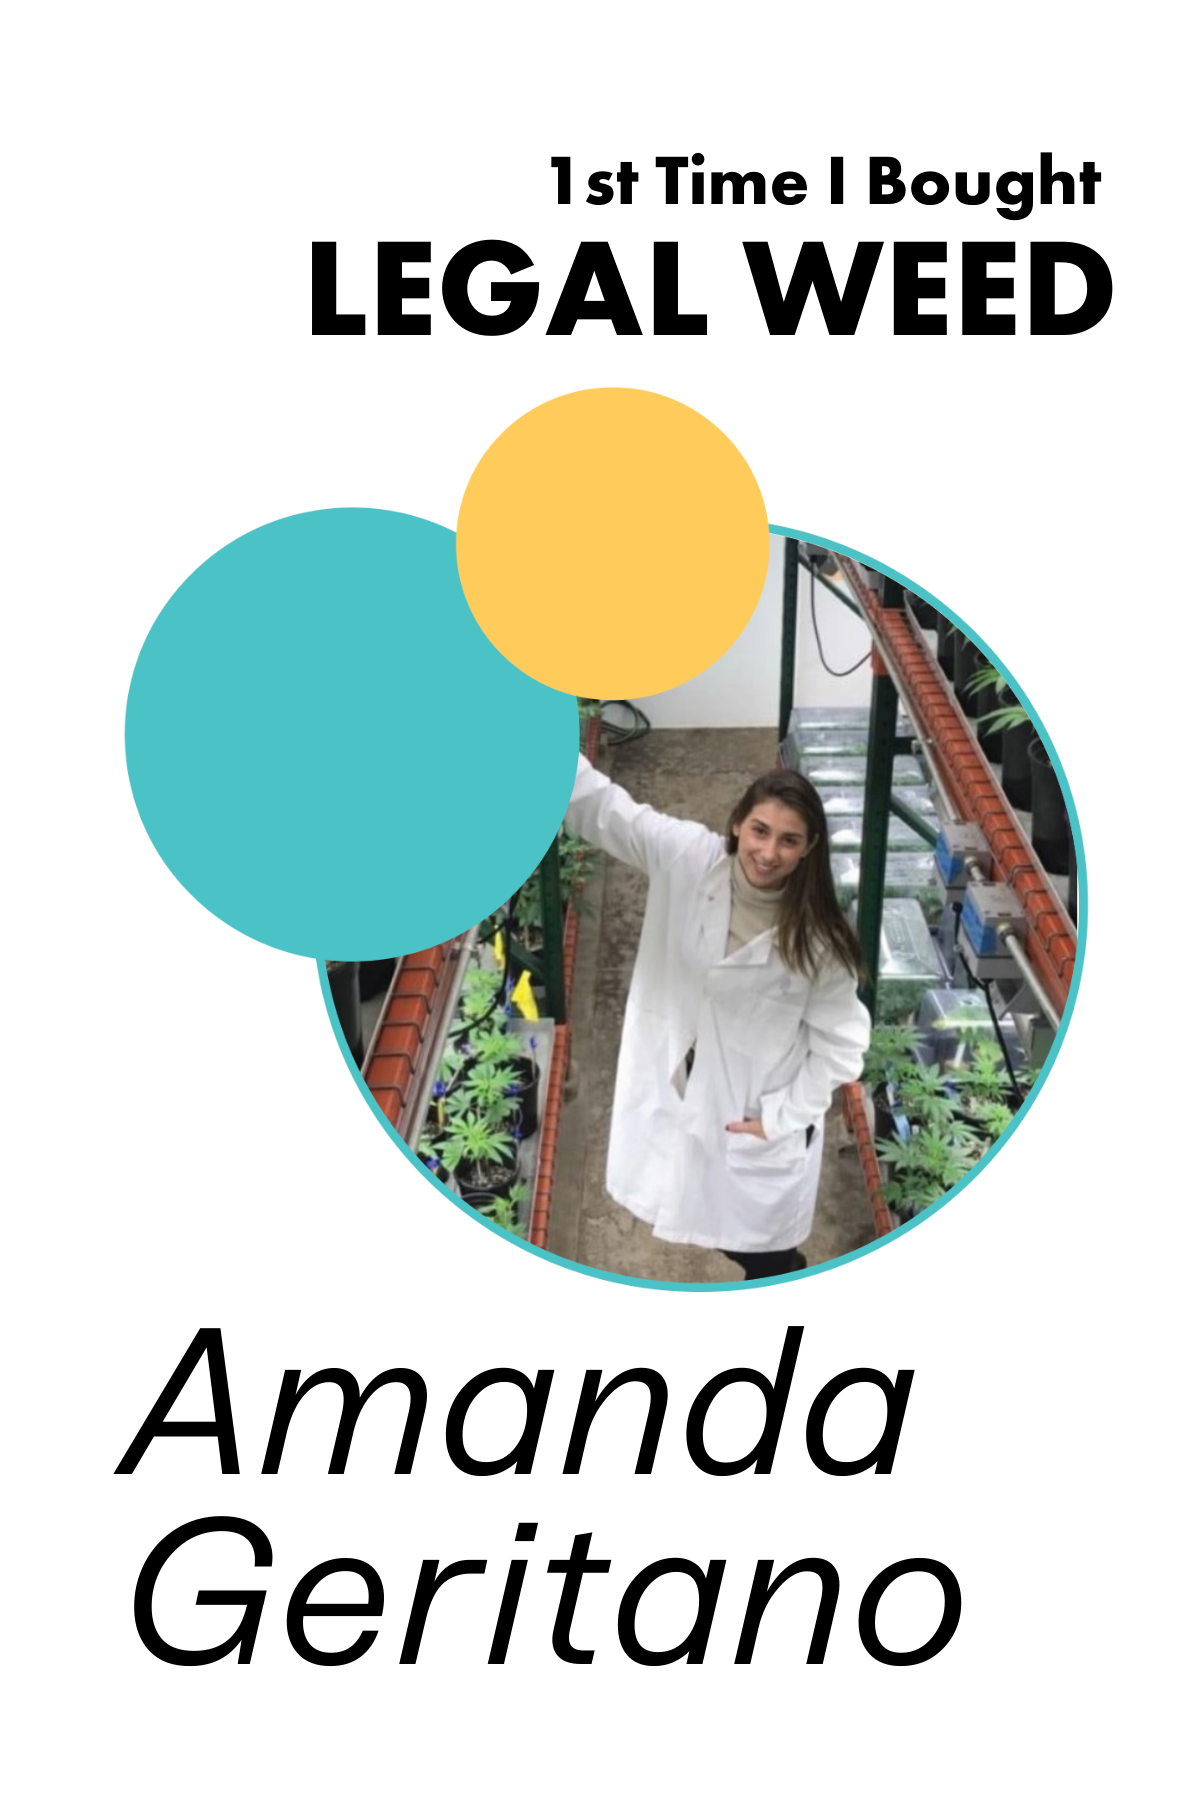 70. The 1st time i bought legal weed: Amanda Geritano of Saved by Cannabis